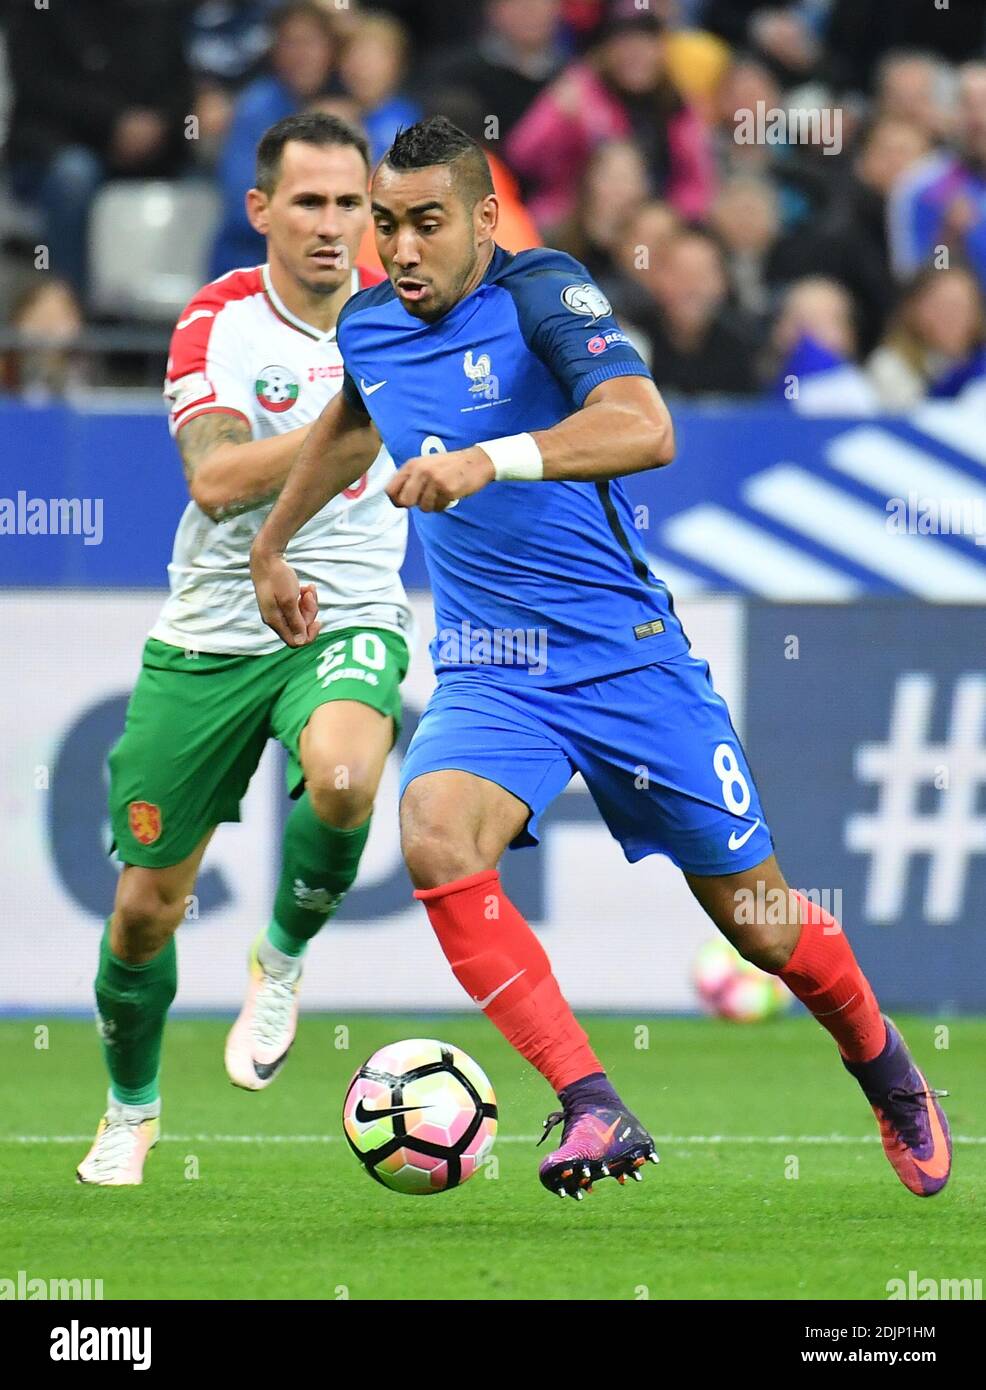 France's Dimitri Payet during the 2018 FIFA World Cup qualification match  France vs Bulgaria at Stade de France in Saint-Denis, near Paris, France on  October 7, 2016. France won 4-1. Photo by